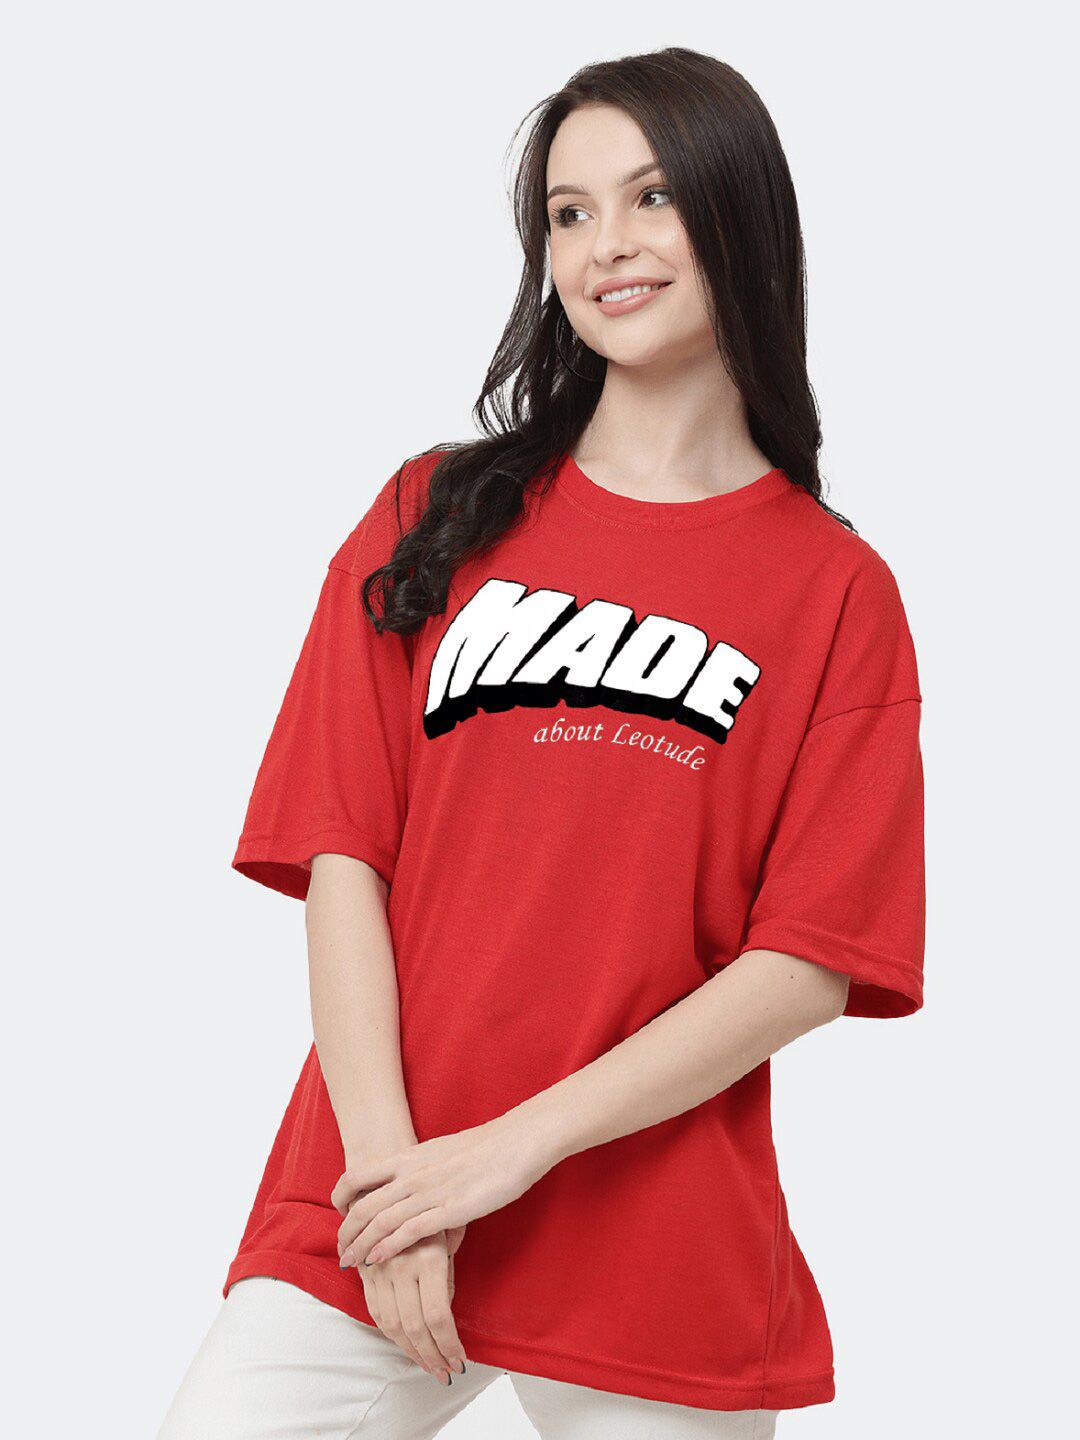 Leotude Typography Printed Oversized T-shirt Price in India